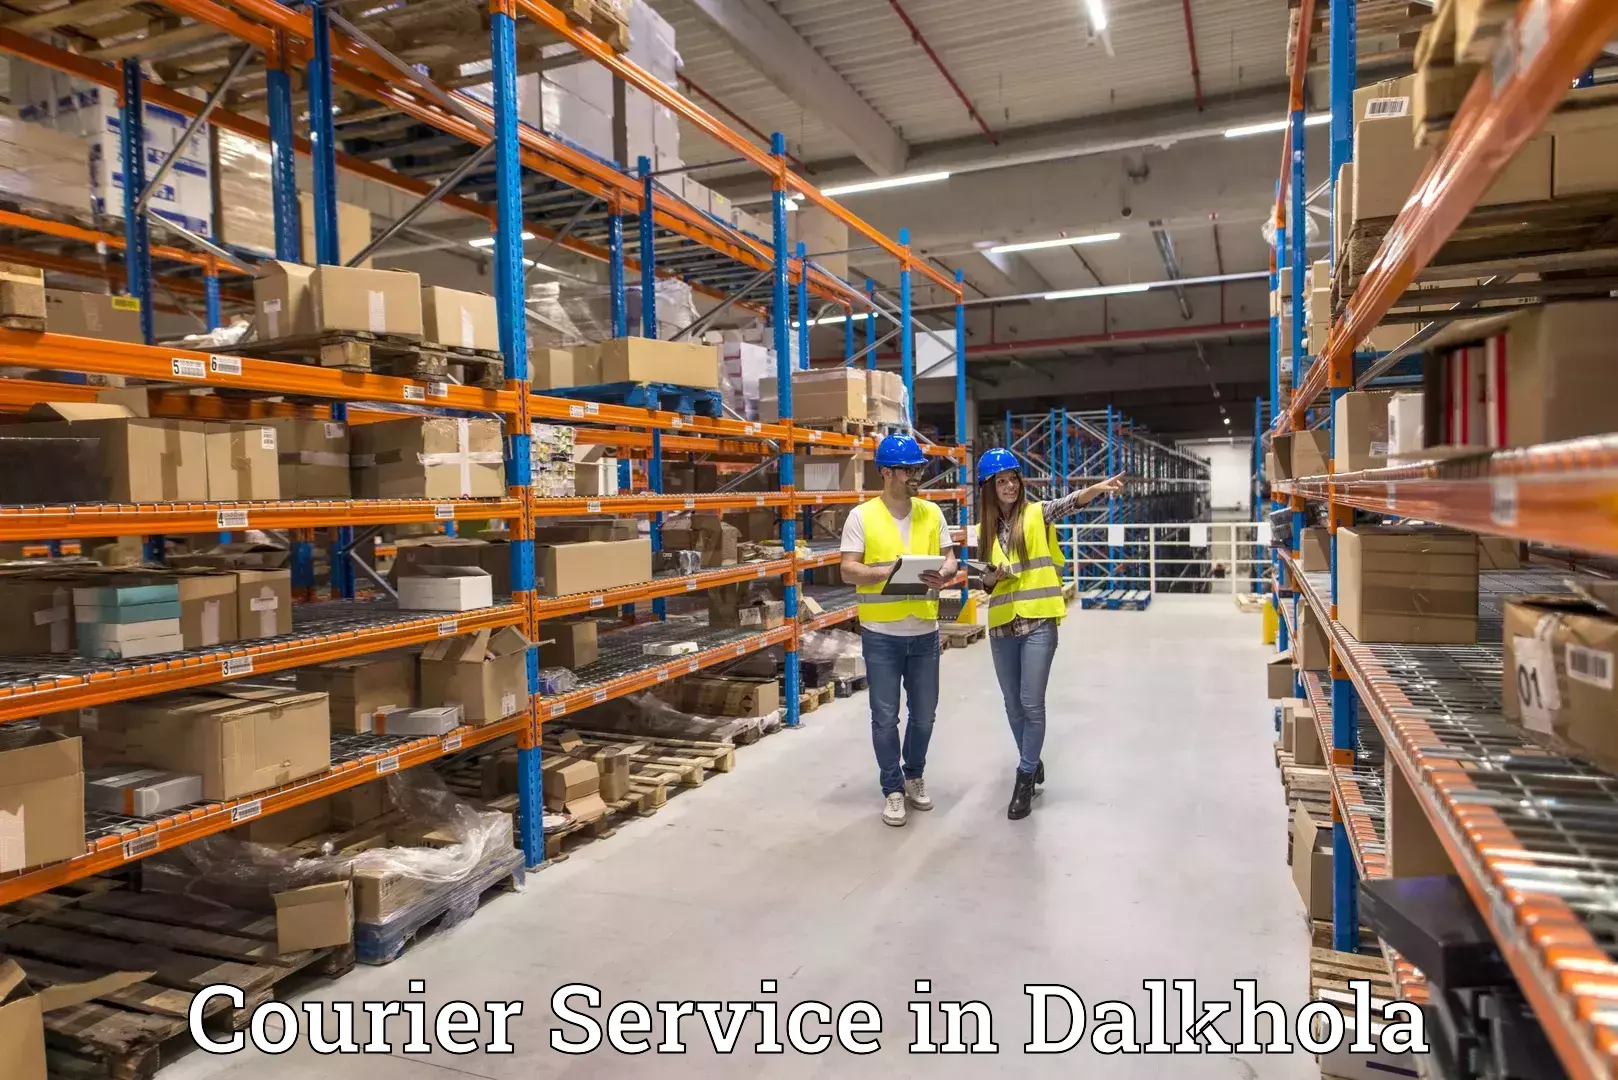 Express logistics providers in Dalkhola